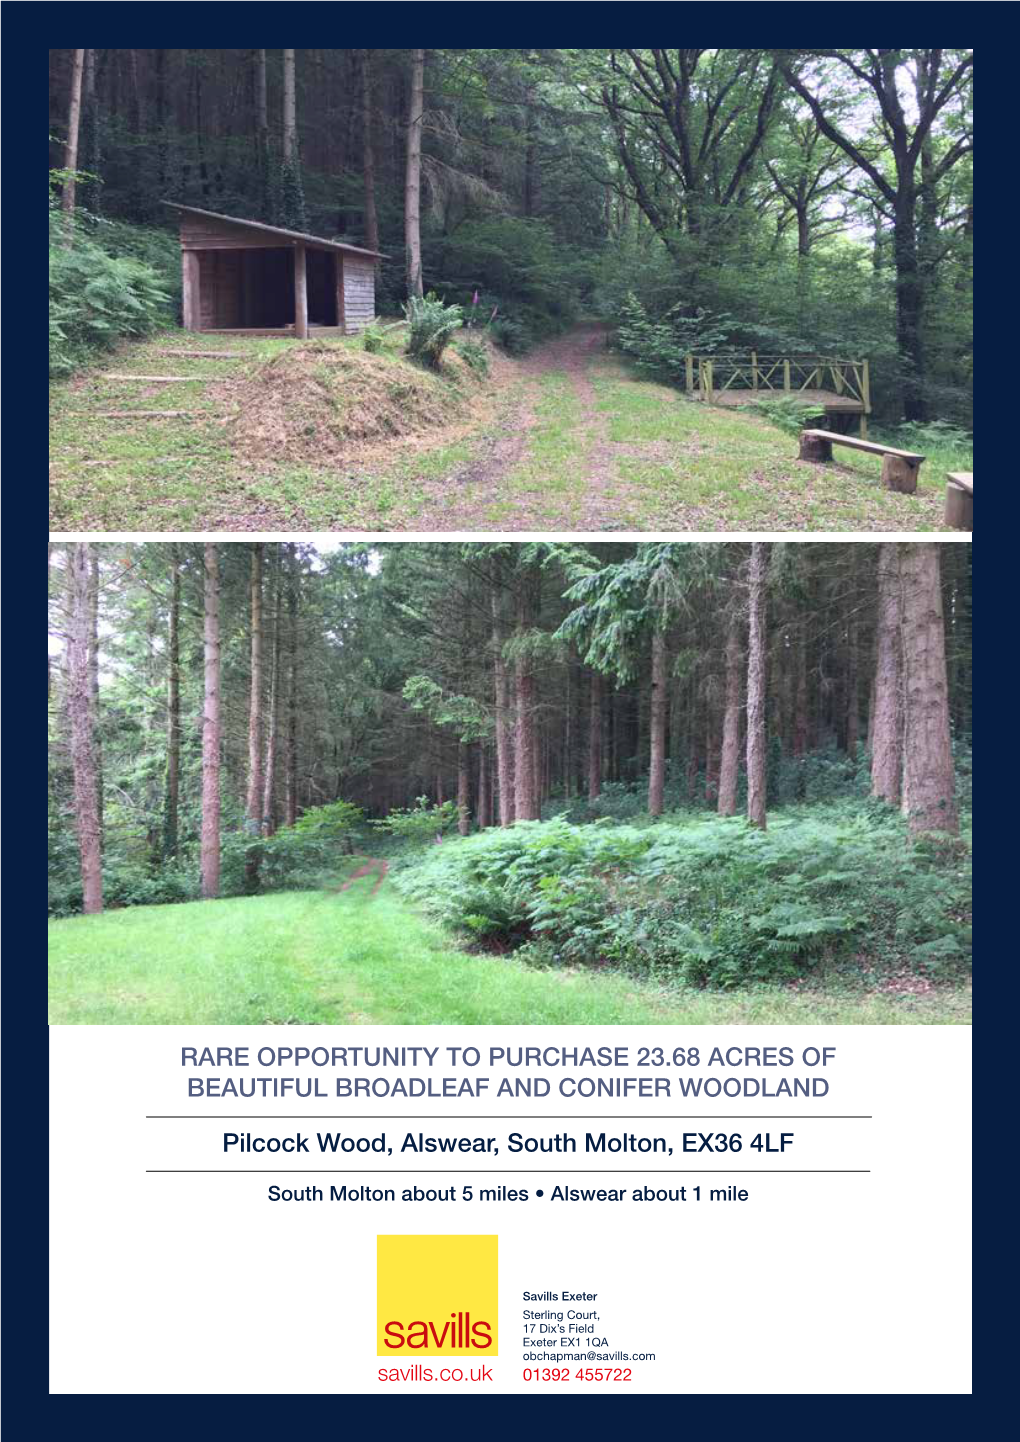 Rare Opportunity to Purchase 23.68 Acres of Beautiful Broadleaf and Conifer Woodland